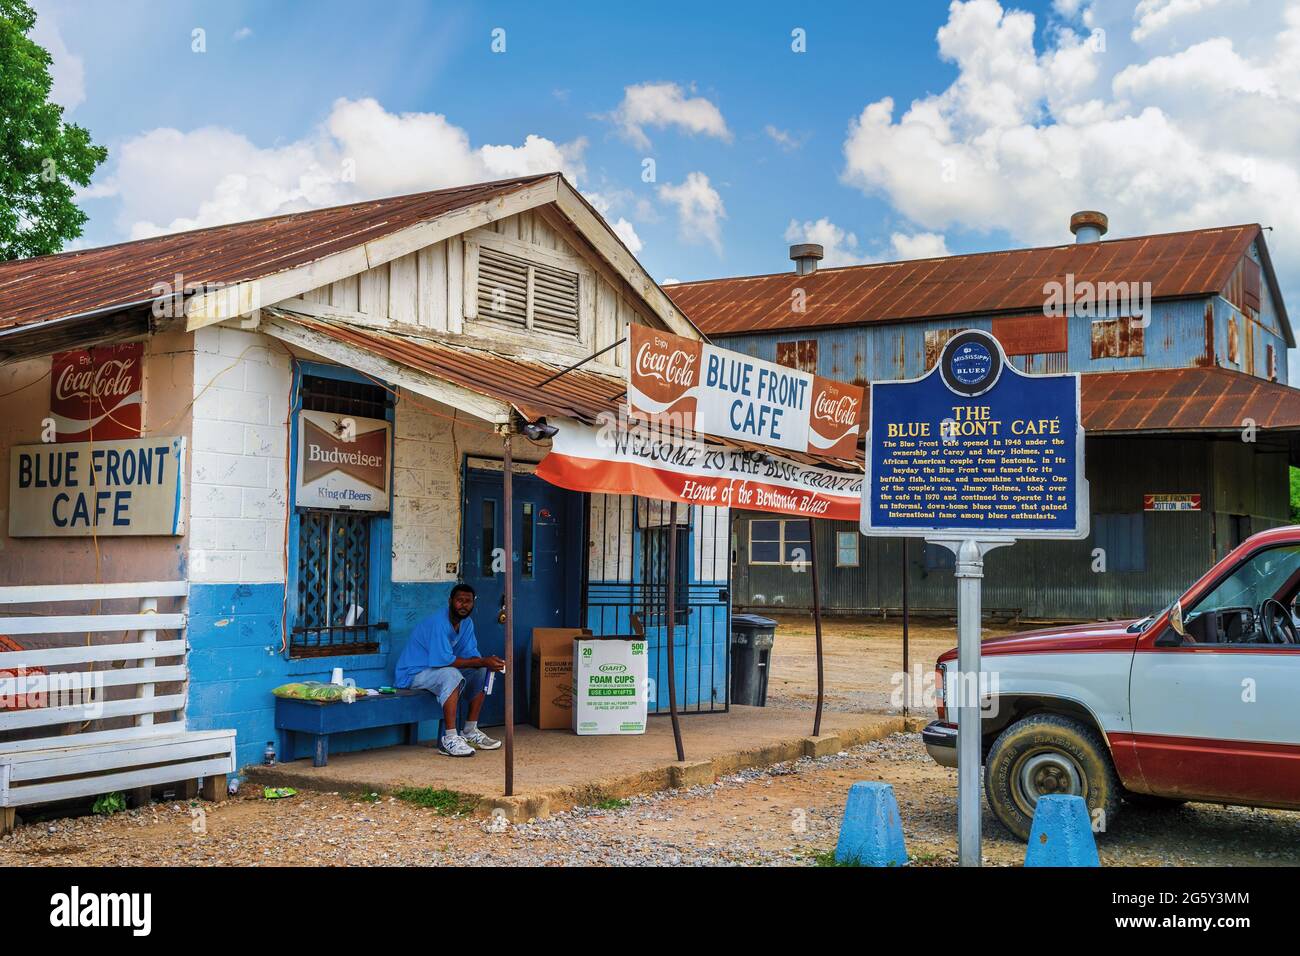 Blue Front Cafe the oldest Juke Joint in Mississippi famous for blues music, Bentonia, Ms. Stock Photo